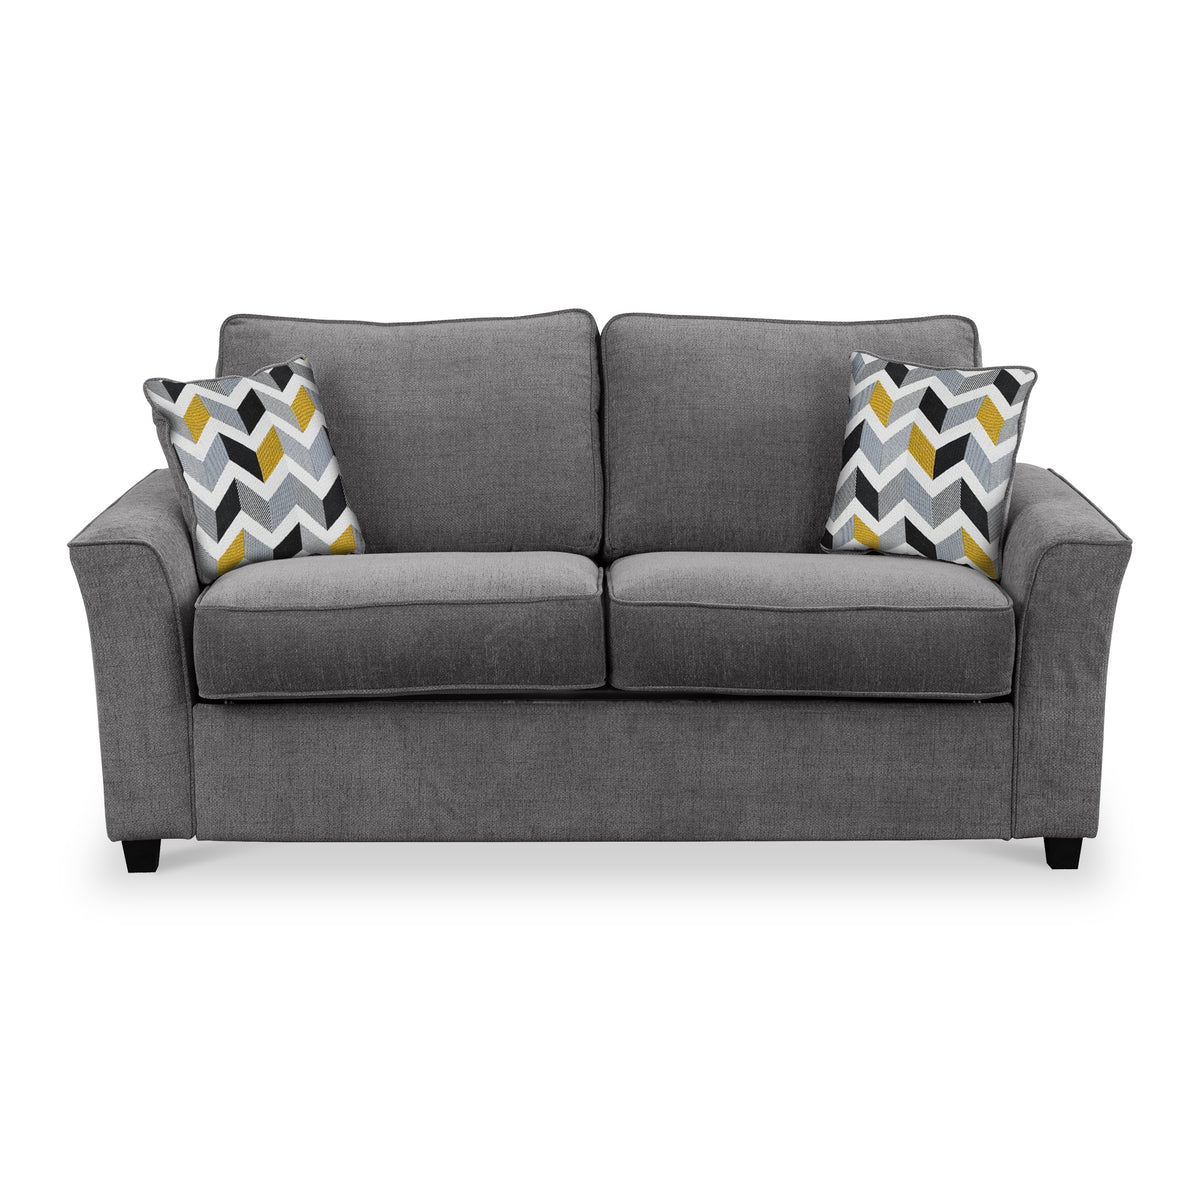 Boston 2 Seater Sofabed in Charcoal with Morelisa Mustard Cushions by Roseland Furniture